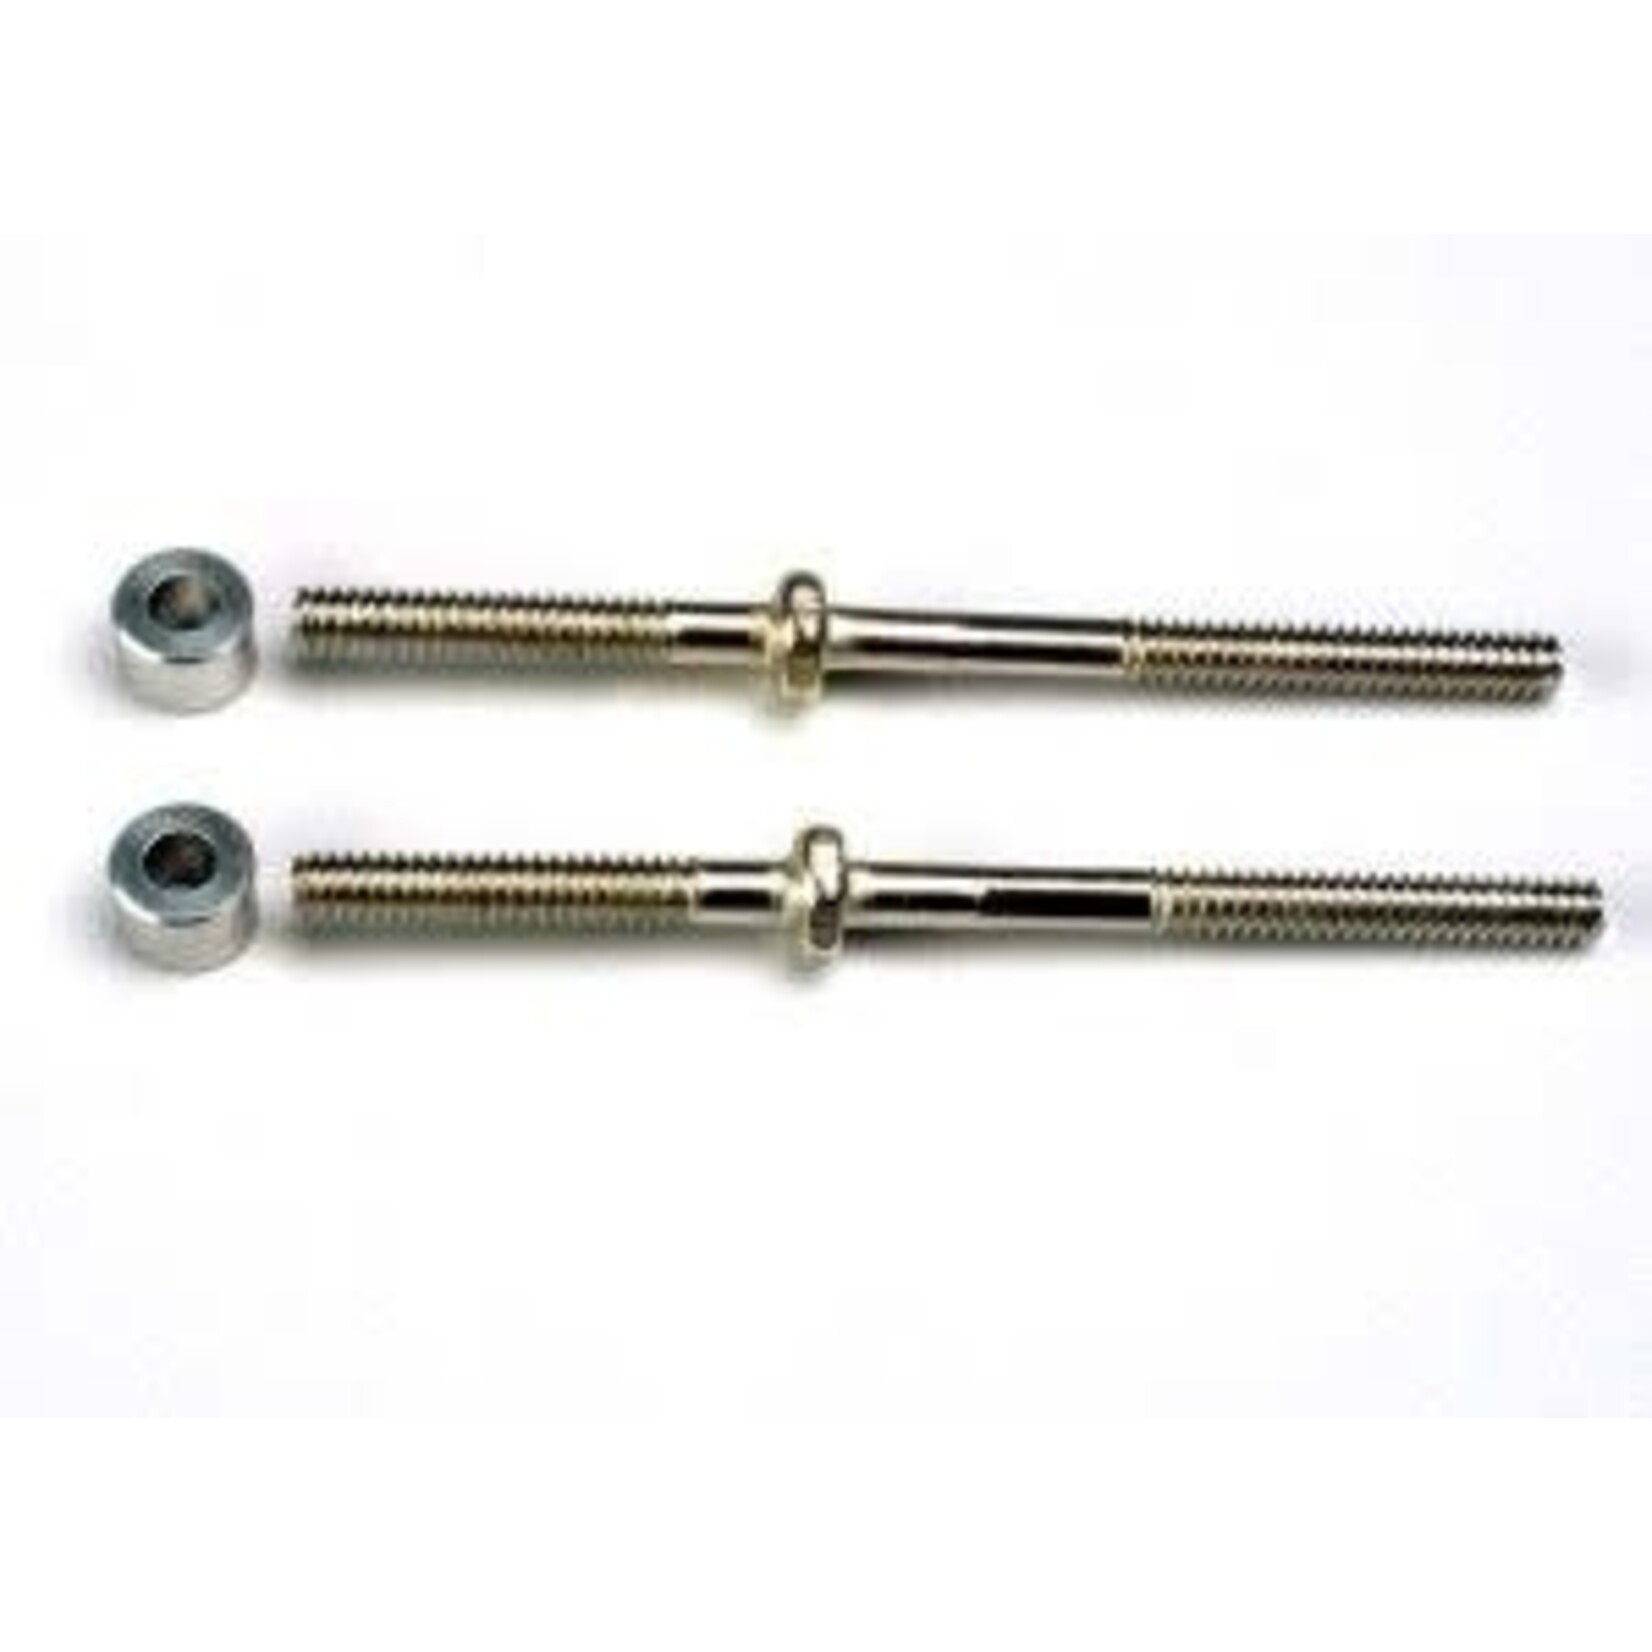 Traxxas 1937 Turnbuckles (54mm) (2)/ 3x6x4mm aluminum spacers (rear camber links)